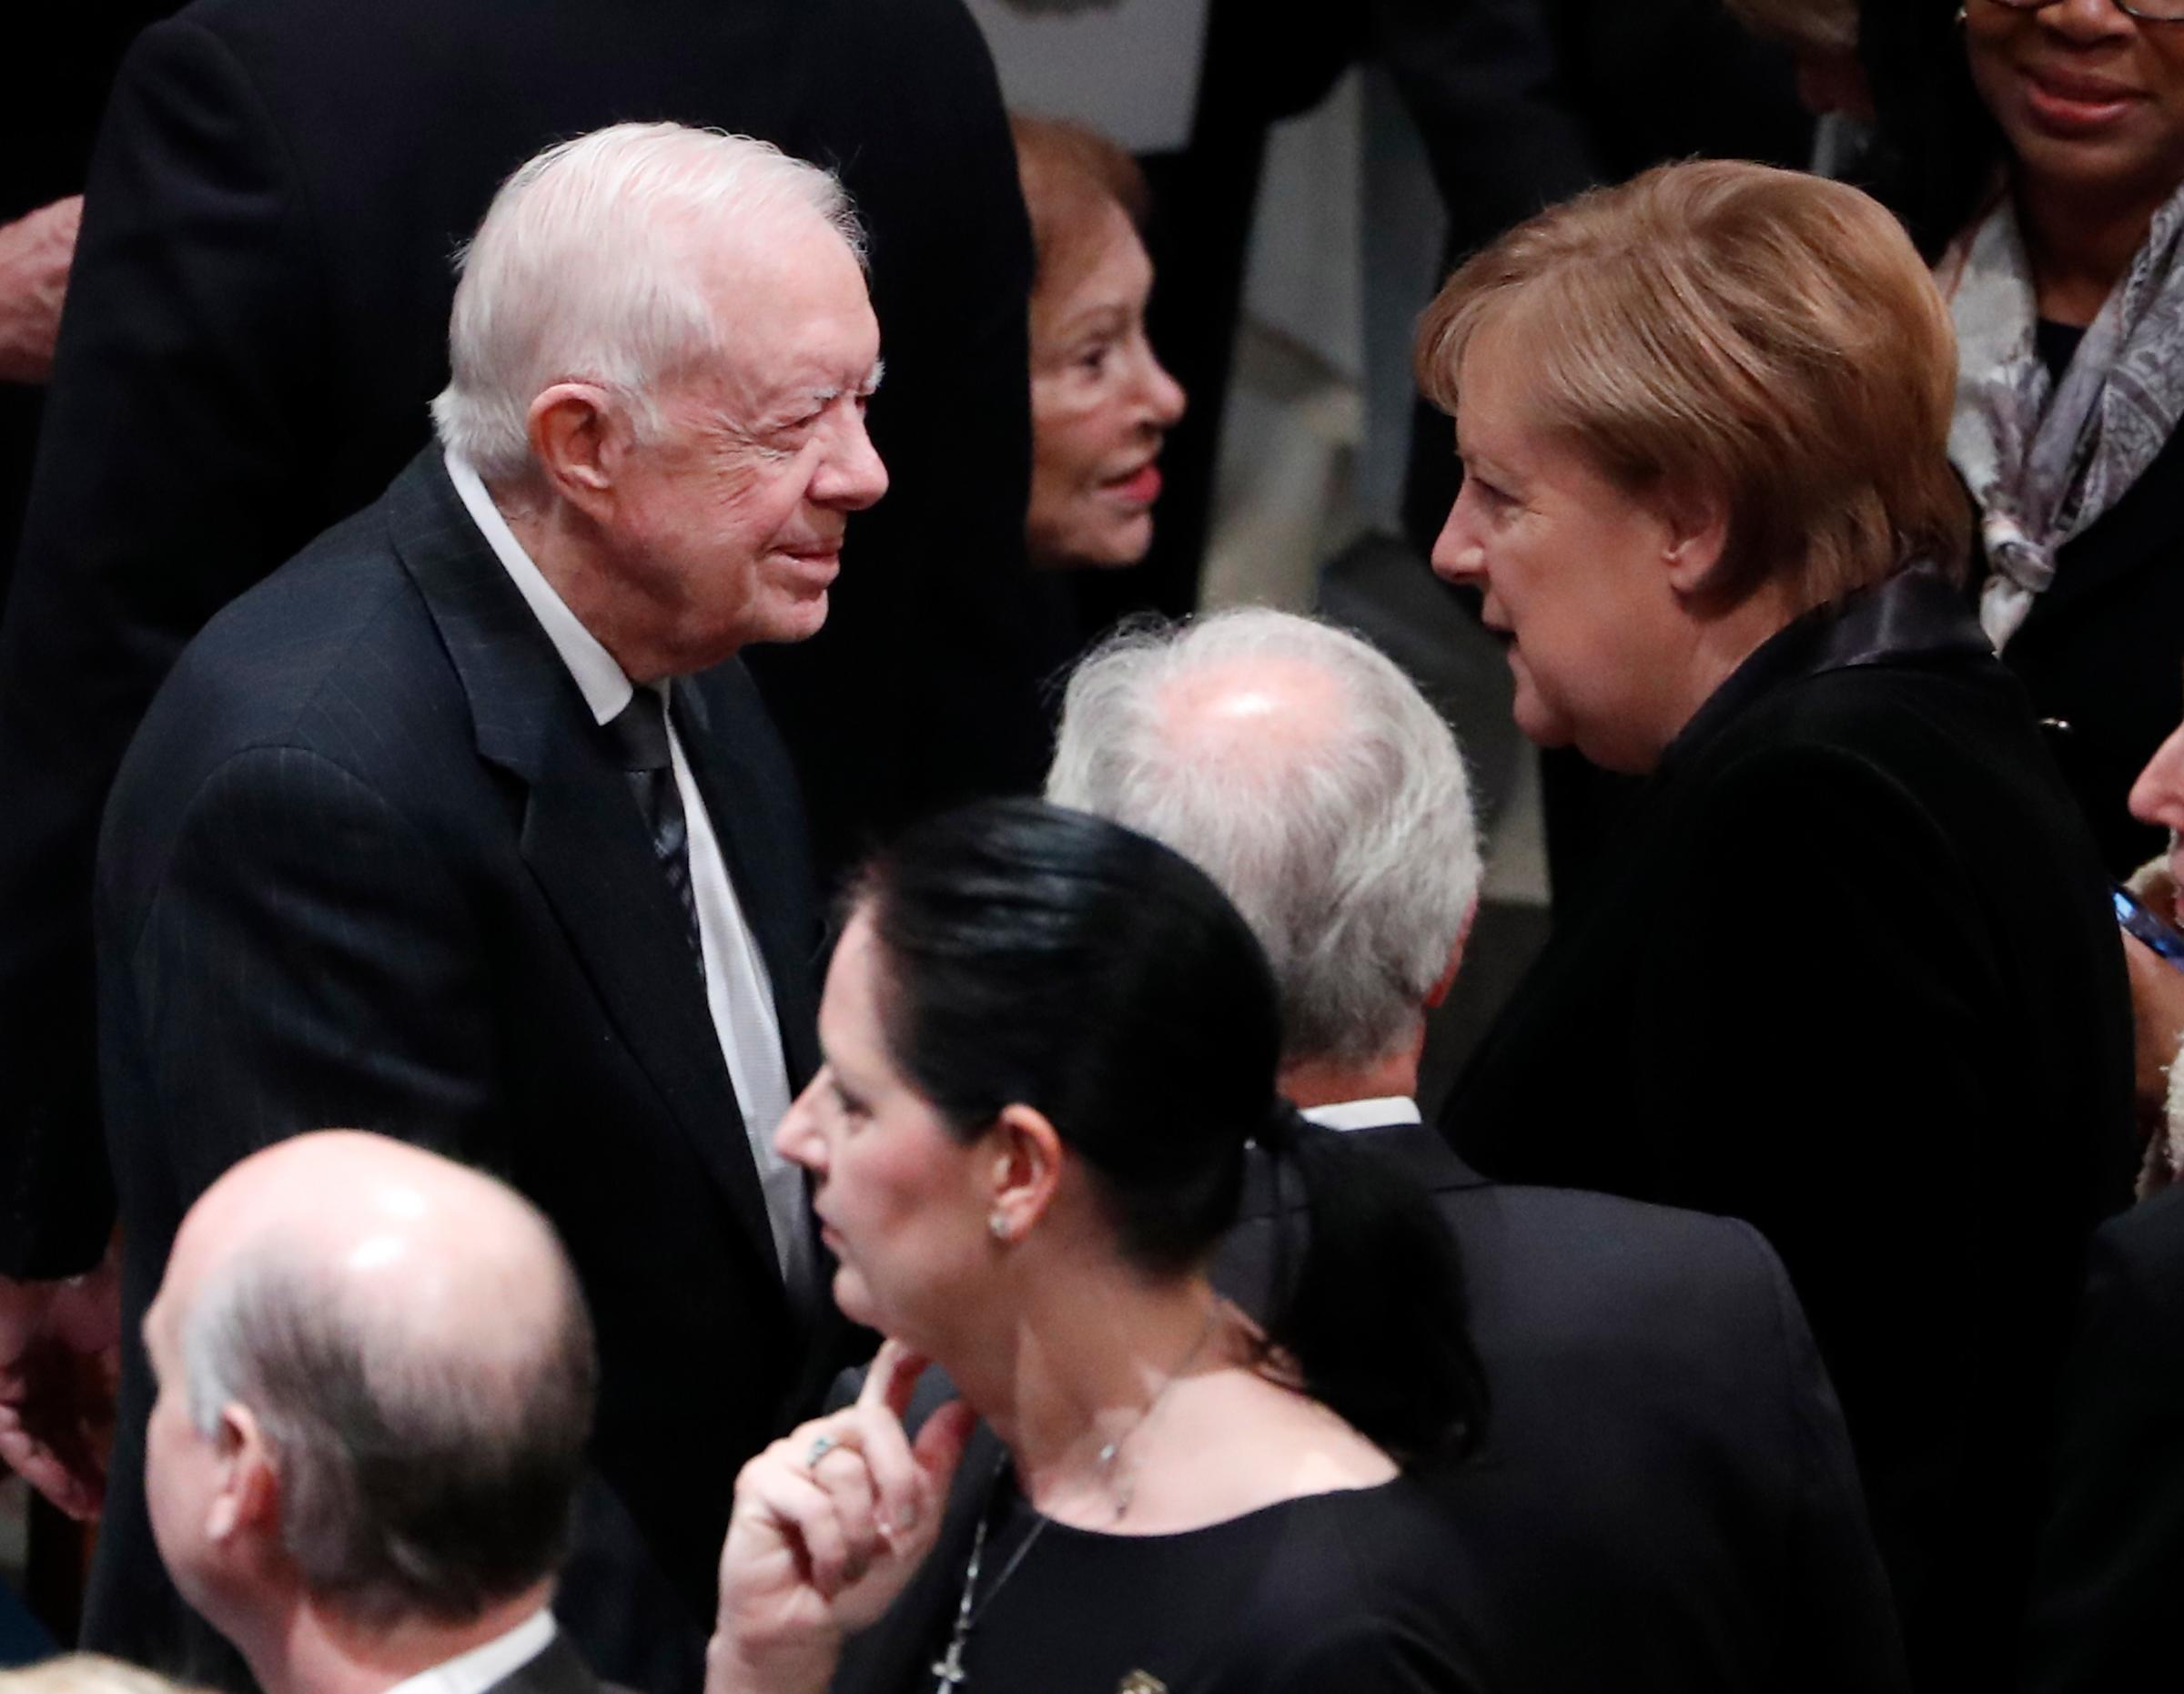 Former United States President Jimmy Carter talks with German Chancellor Angela Merkel as they attend the funeral of former United States President George H. W. Bush at the National Cathedral